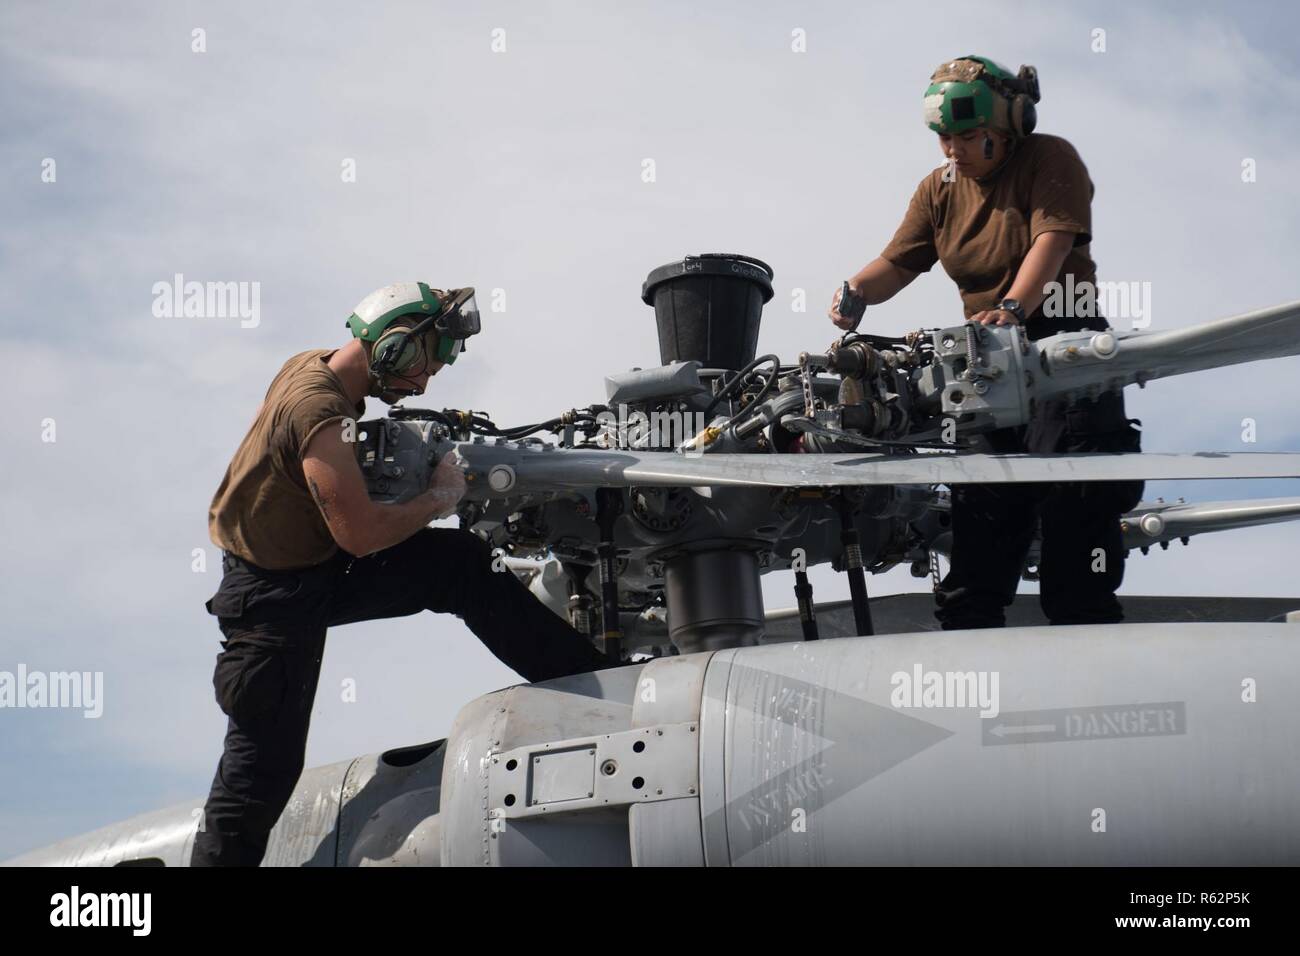 PACIFIC OCEAN (Nov. 20, 2018) Aviation Electronics Technician 3rd Class Alton Laussade, left, from Raceland, Louisiana, and Aviation Machinist’s Mate Airman Remely Culas, from Garden Grove, California, clean the main rotor pylon of an MH-60R Sea Hawk, with Helicopter Maritime Strike Squadron (HSM) 37, aboard the Arleigh Burke-class guided-missile destroyer USS Chung-Hoon (DDG 93). Chung-Hoon is underway conducting routine operations as part of Carrier Strike Group (CSG) 3 in the U.S. Pacific Fleet area of operations. Stock Photo